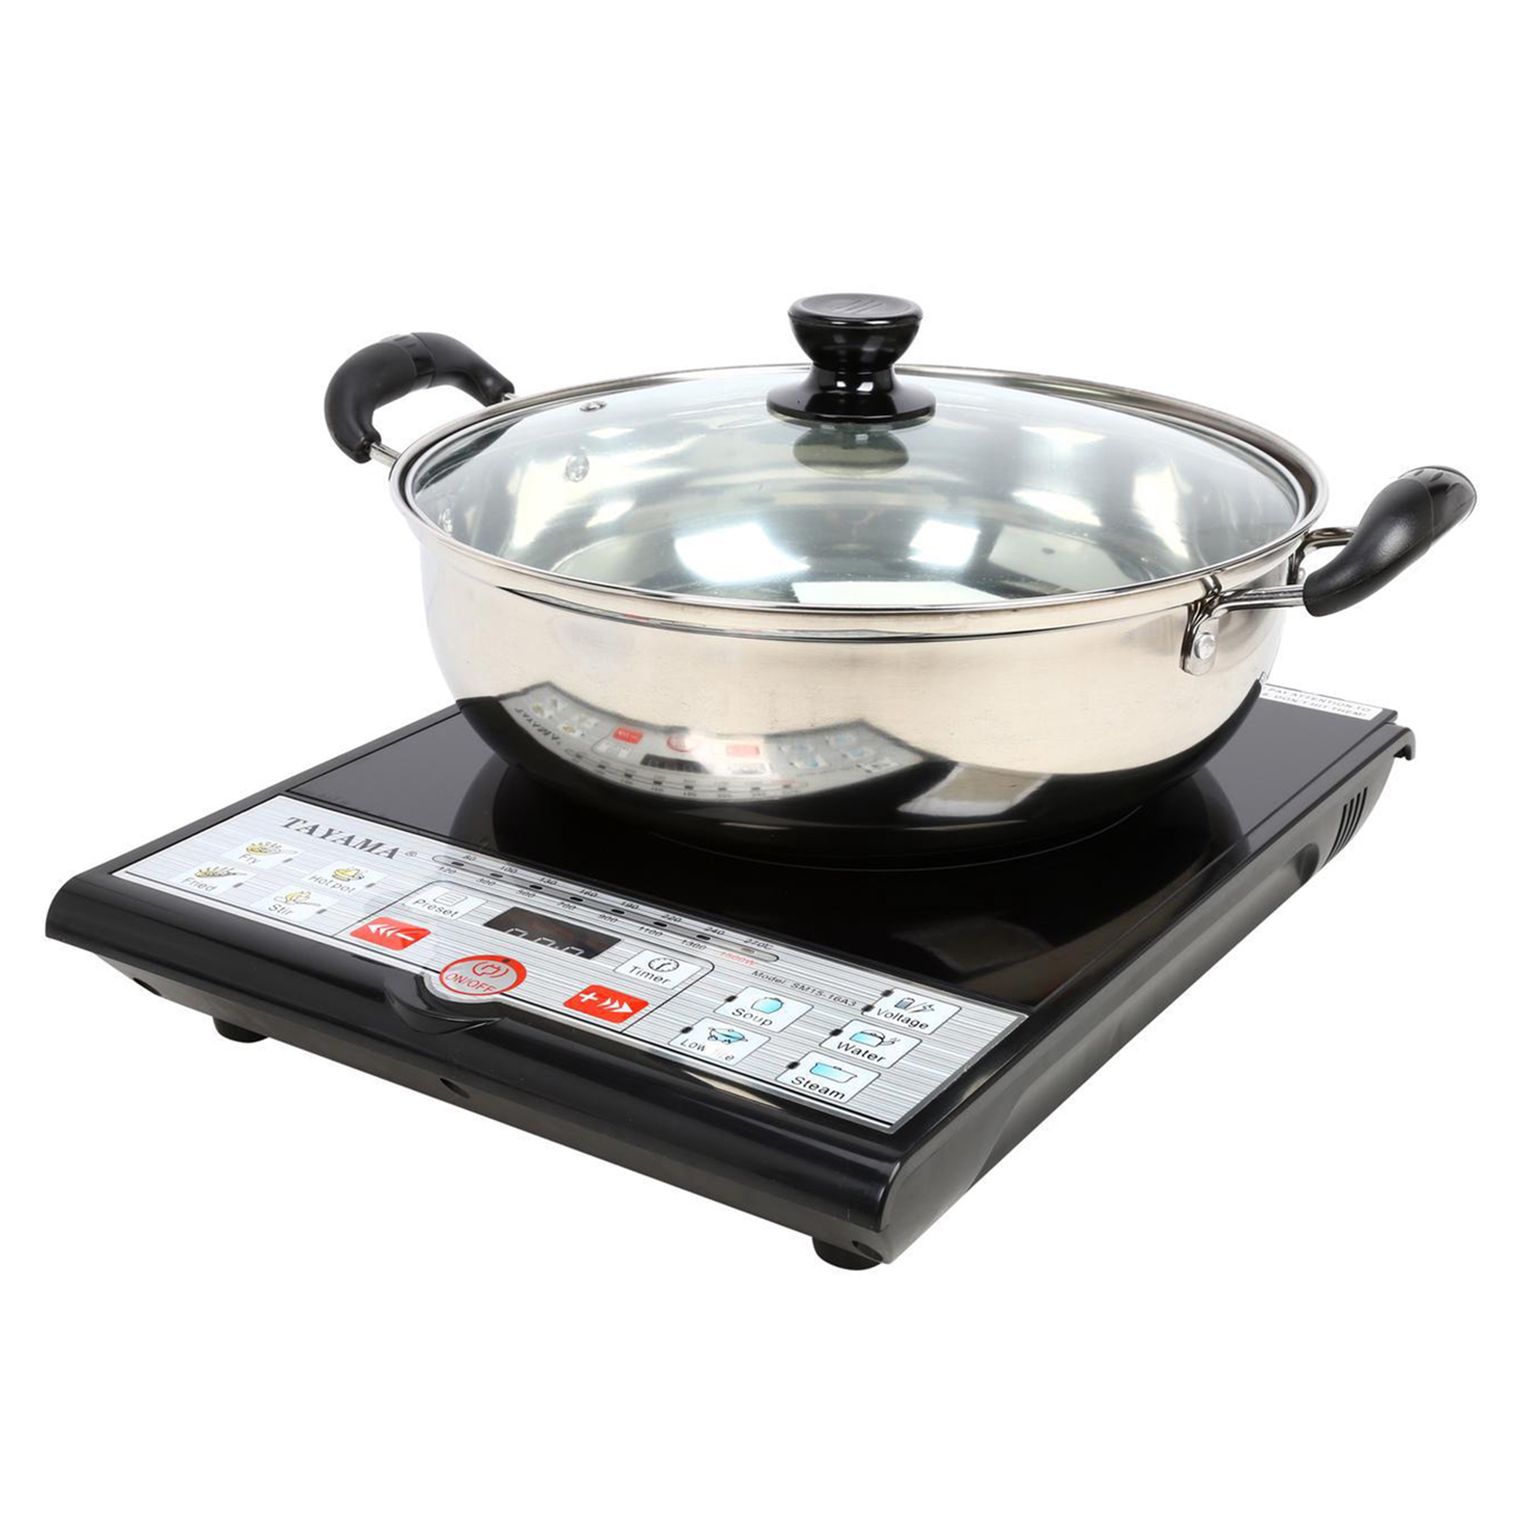 Sm15-16a3 Induction Cooker With Pot